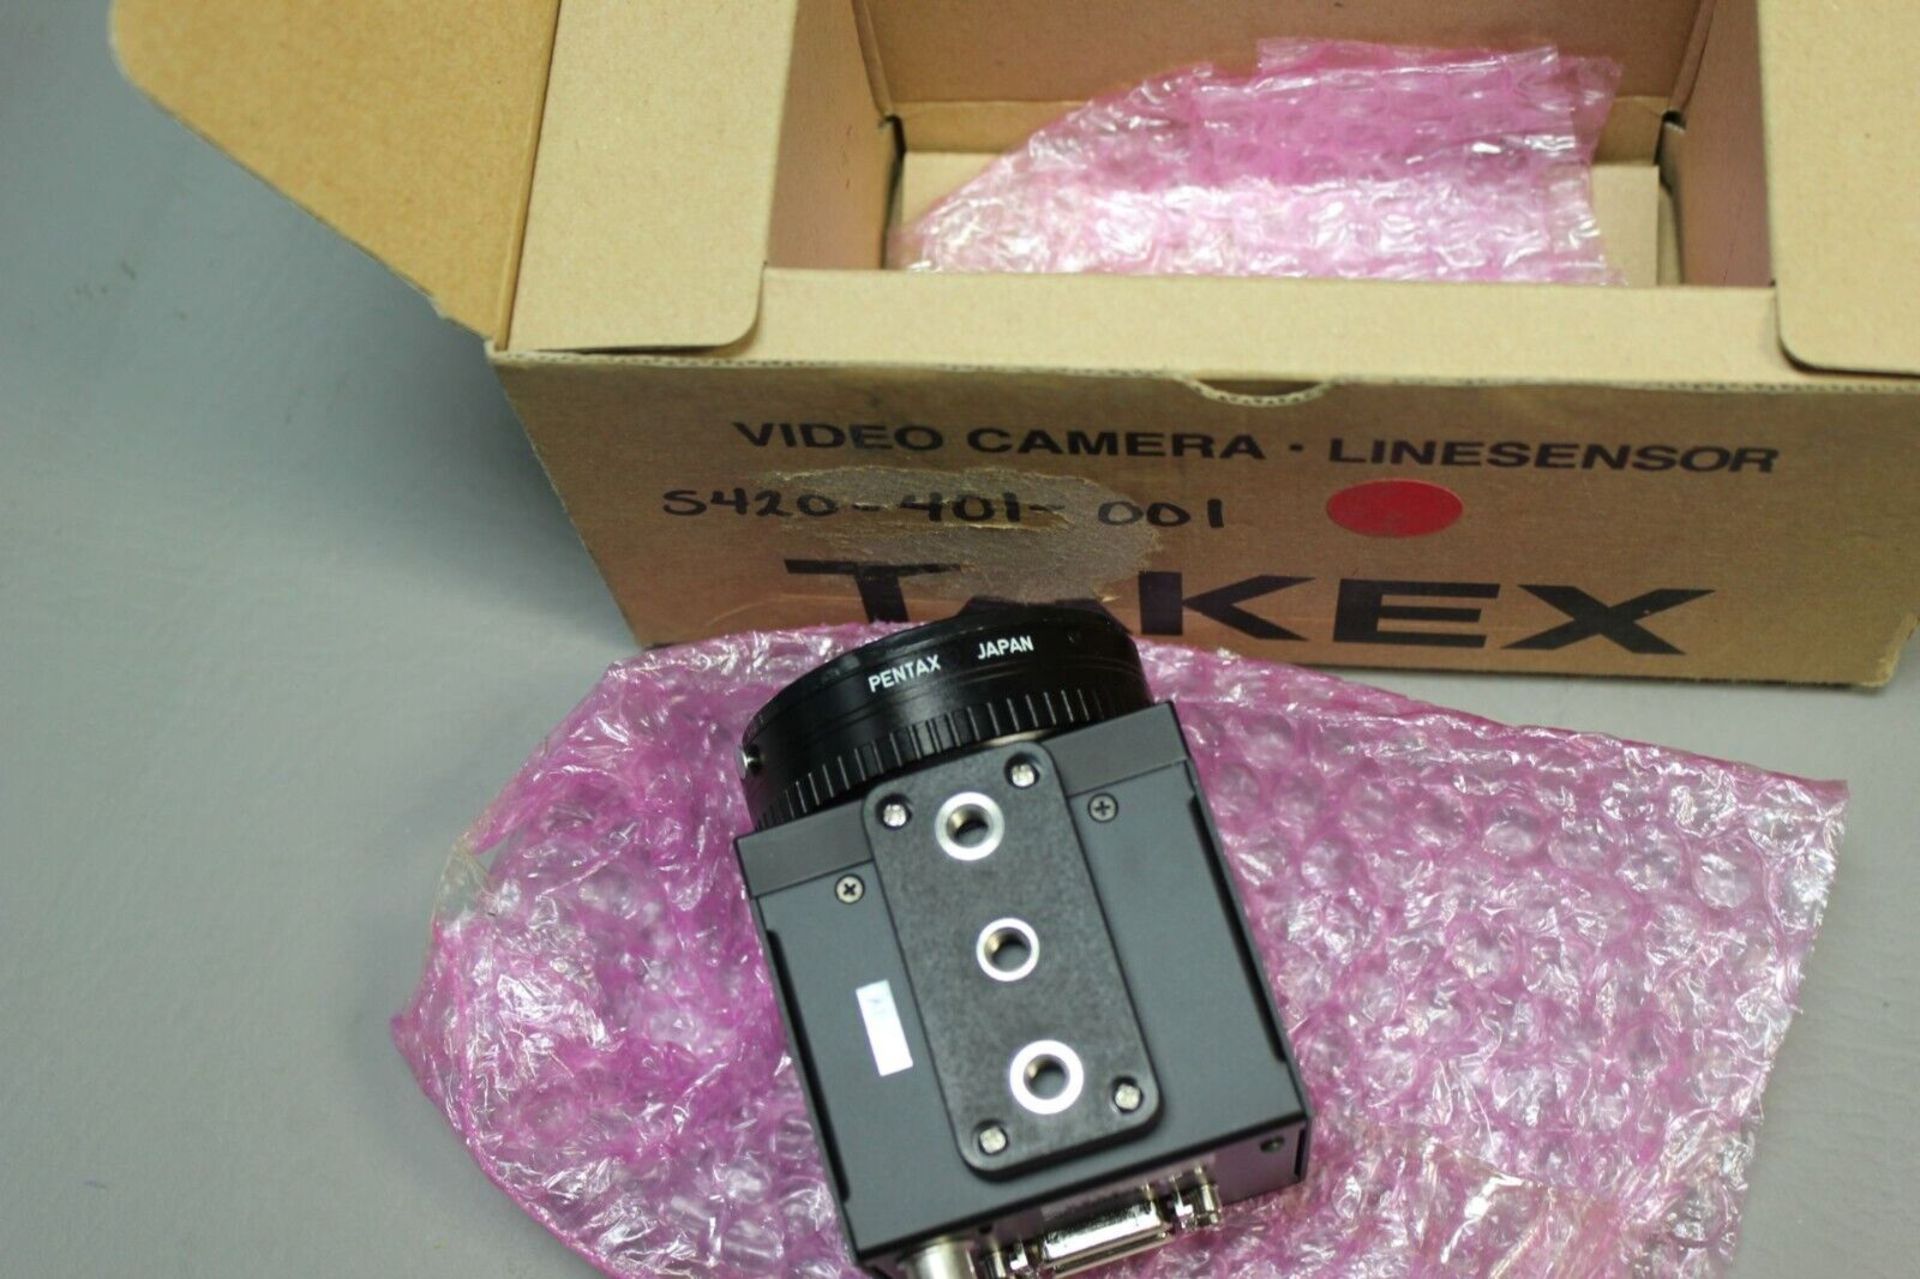 NEW TAKEX DIGITAL LINE SCAN CAMERA - Image 2 of 5